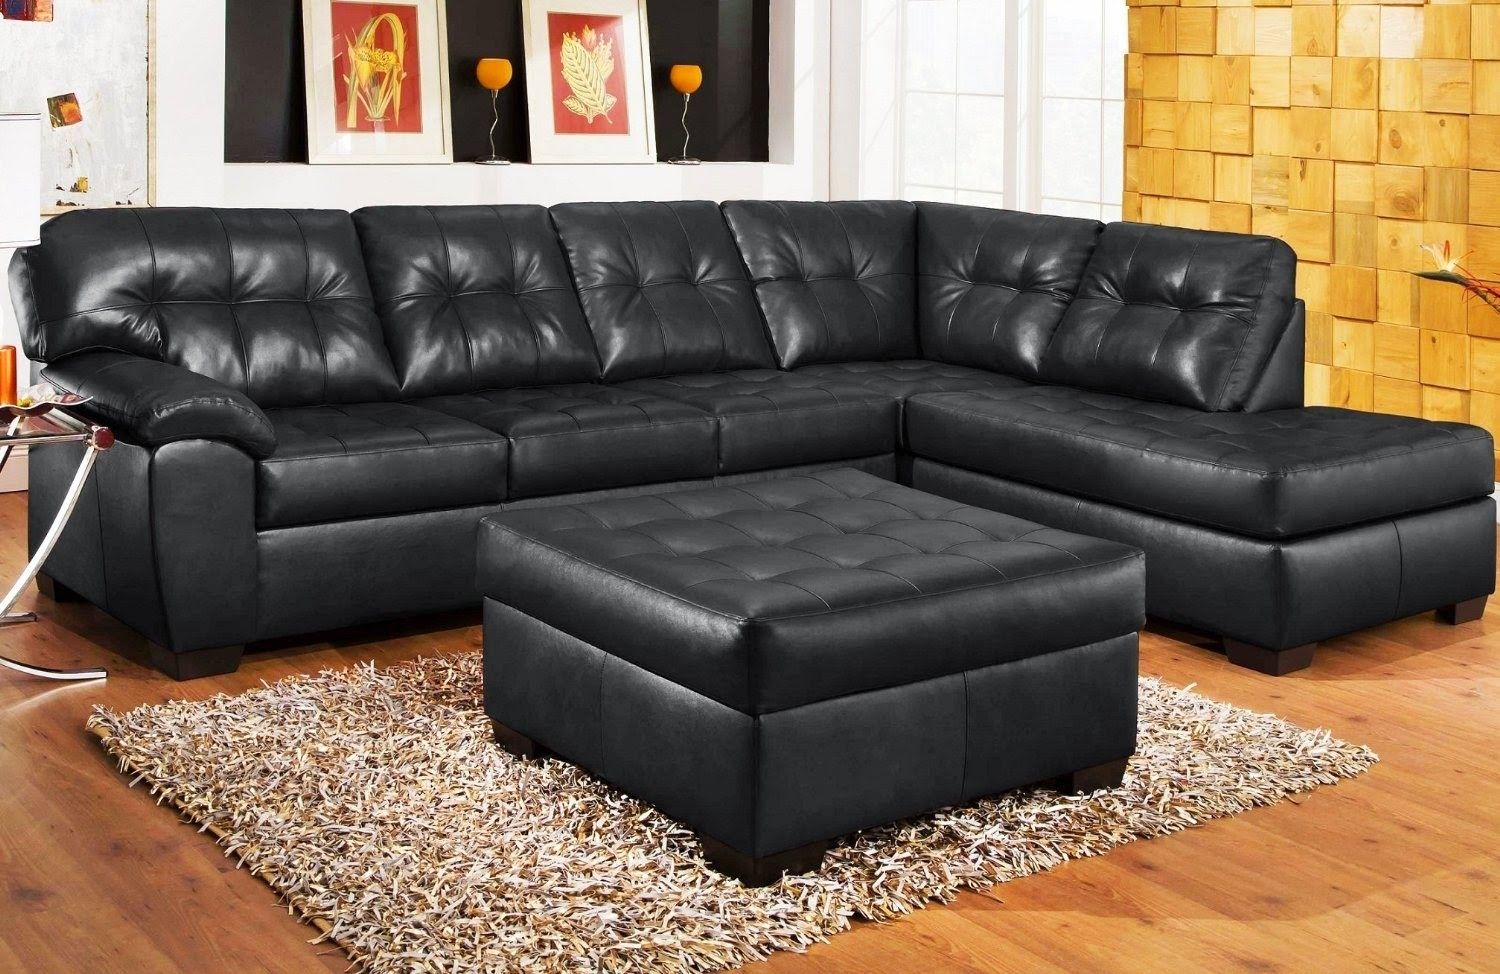 Black Couch: Black Sectional Couch Pertaining To Black Sectional Sofas (View 2 of 15)